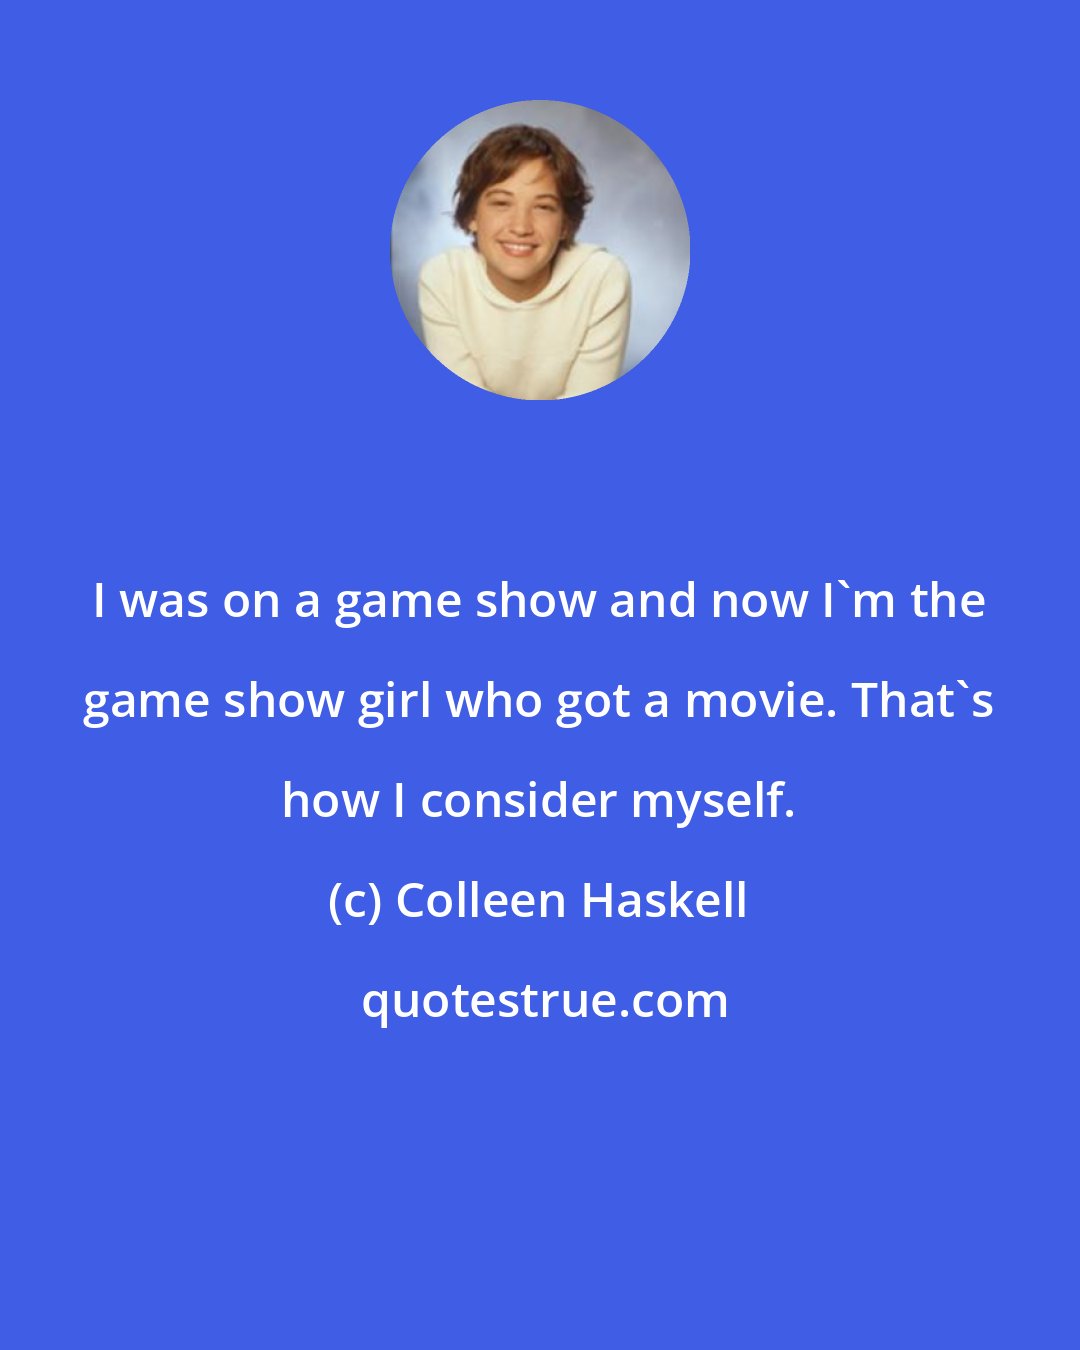 Colleen Haskell: I was on a game show and now I'm the game show girl who got a movie. That's how I consider myself.